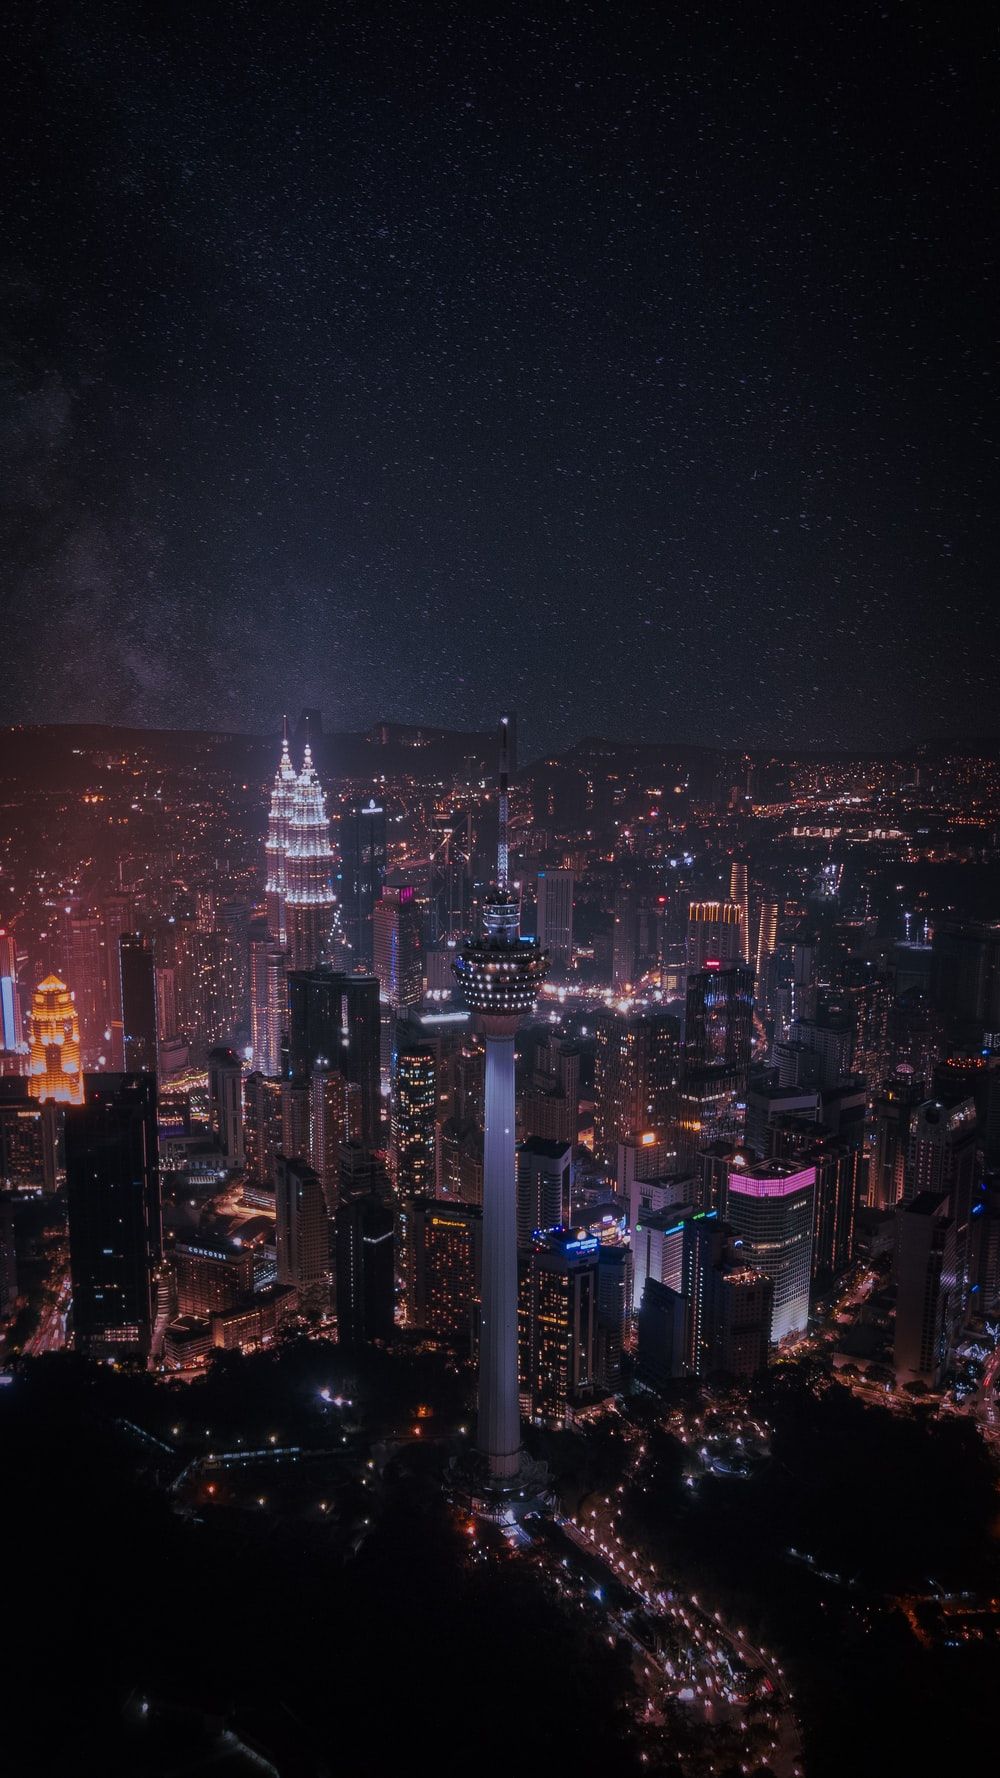 City Night Picture [HD]. Download Free Image